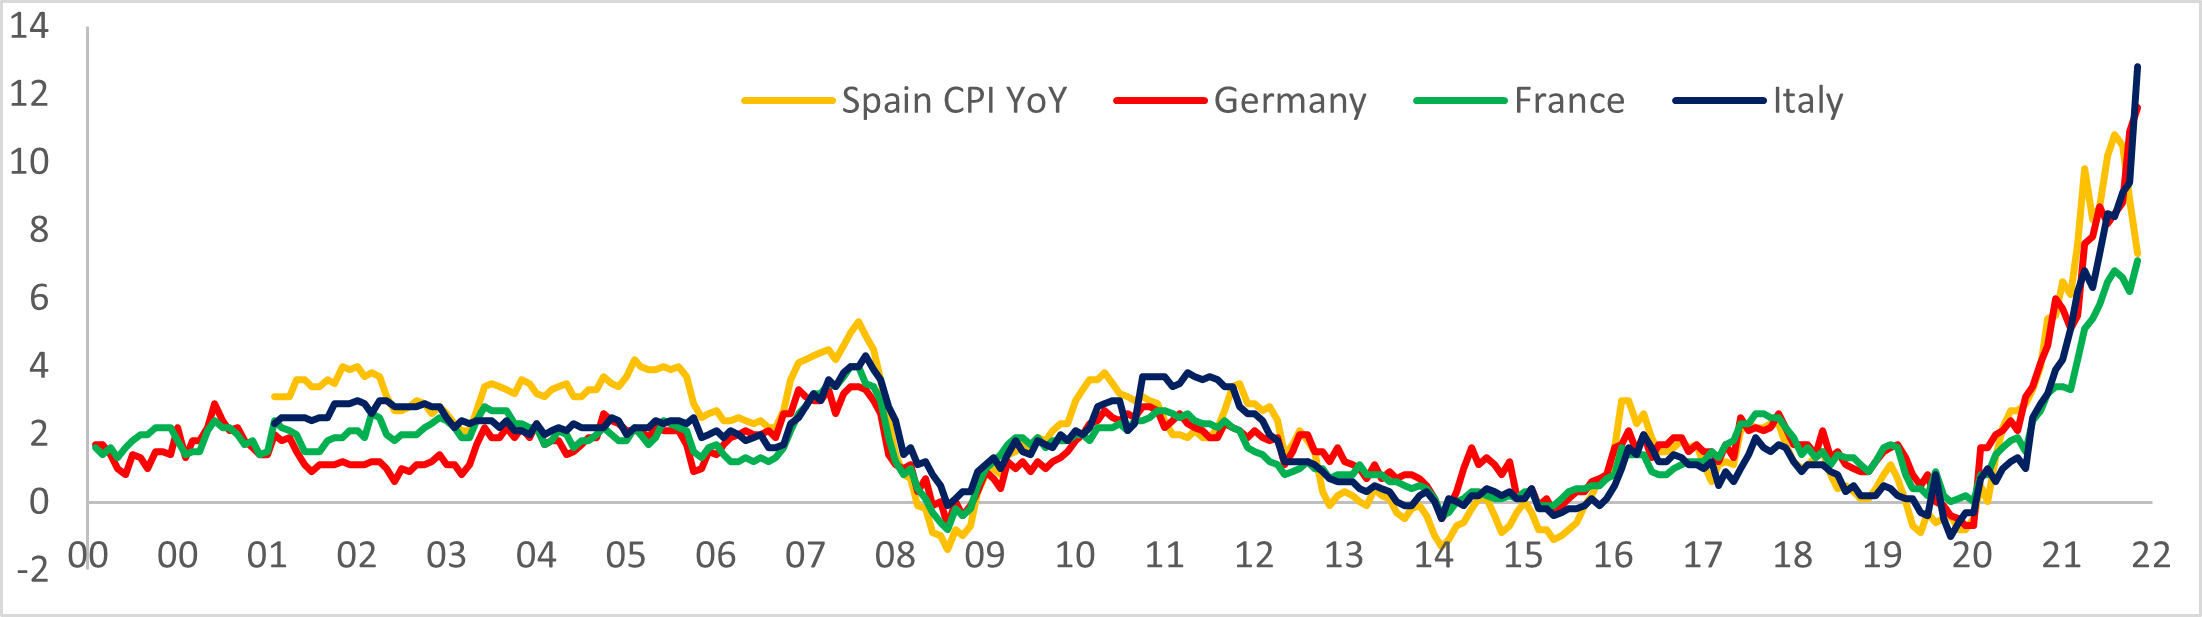 CPI INFLATION INTEREST RATES